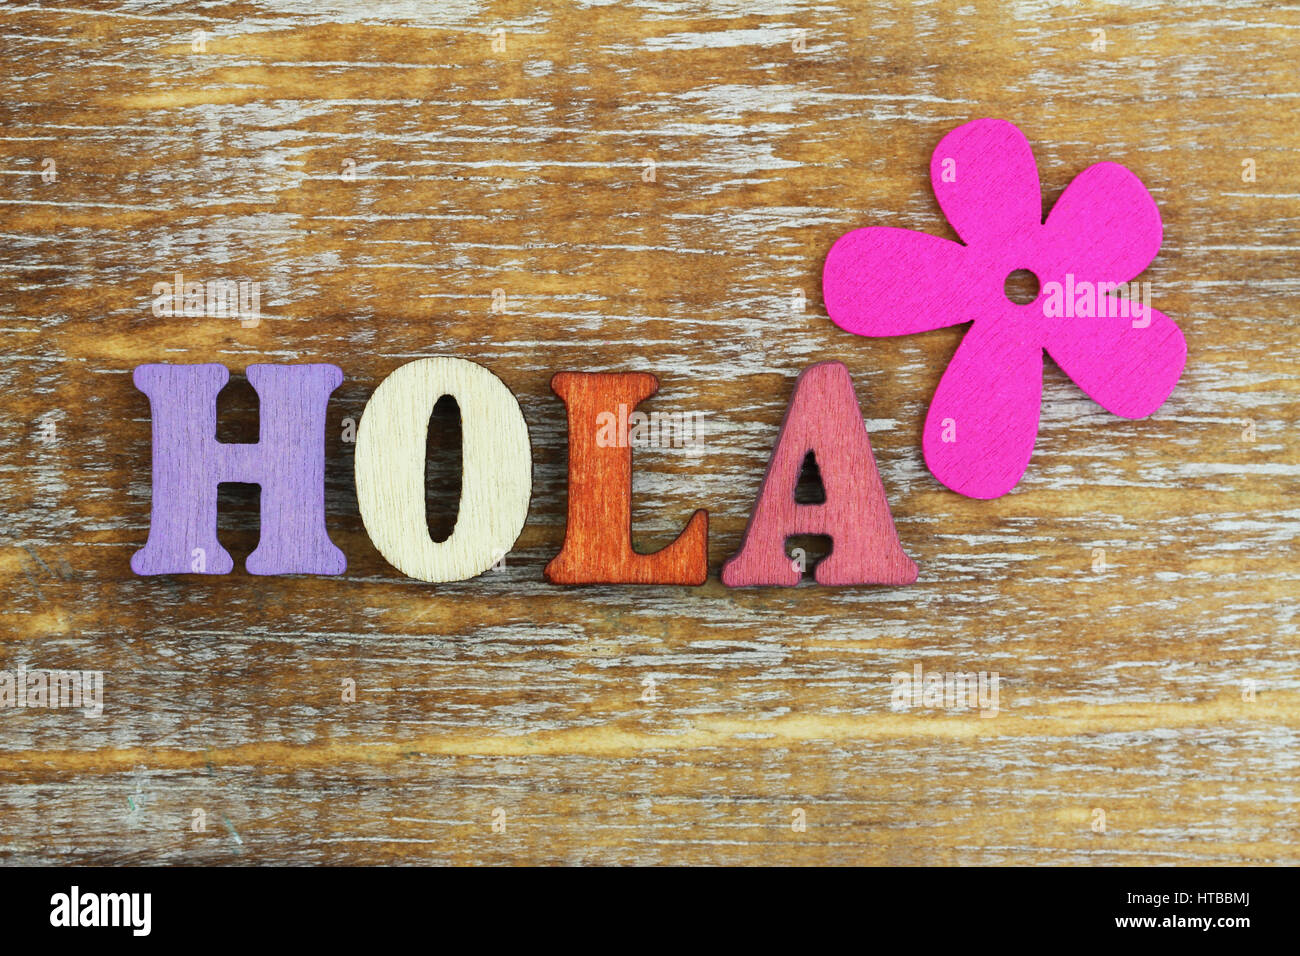 Hola (hello in Spanish) written with colorful wooden letters and pink flower Stock Photo